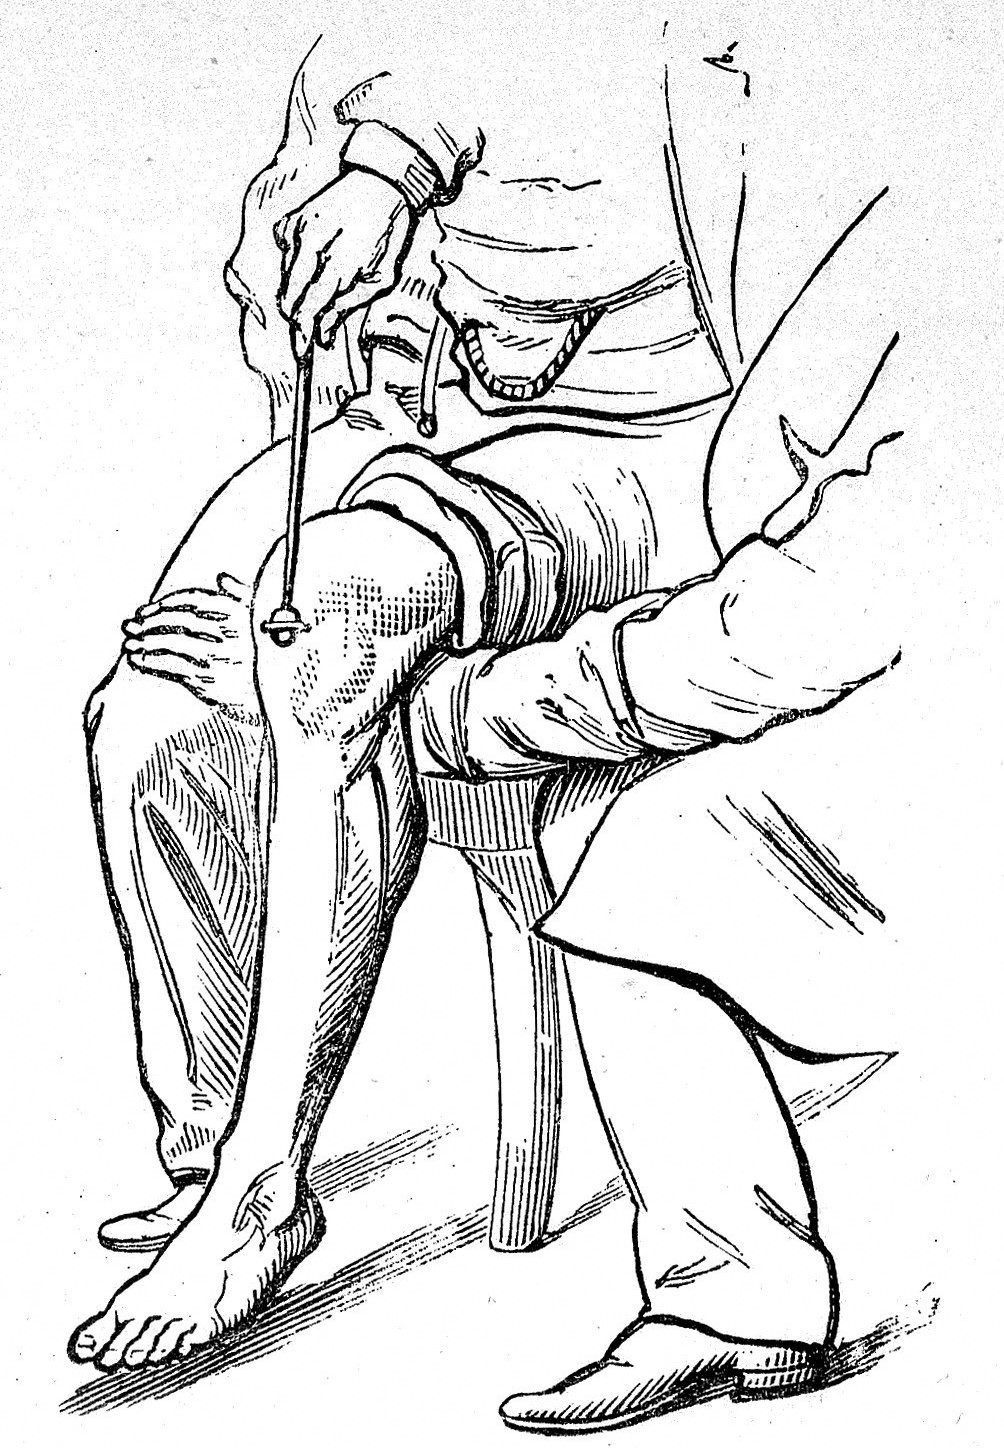 Black and white line drawing of a doctor using a stick to tap a knee of a seated person to test their reflexes.